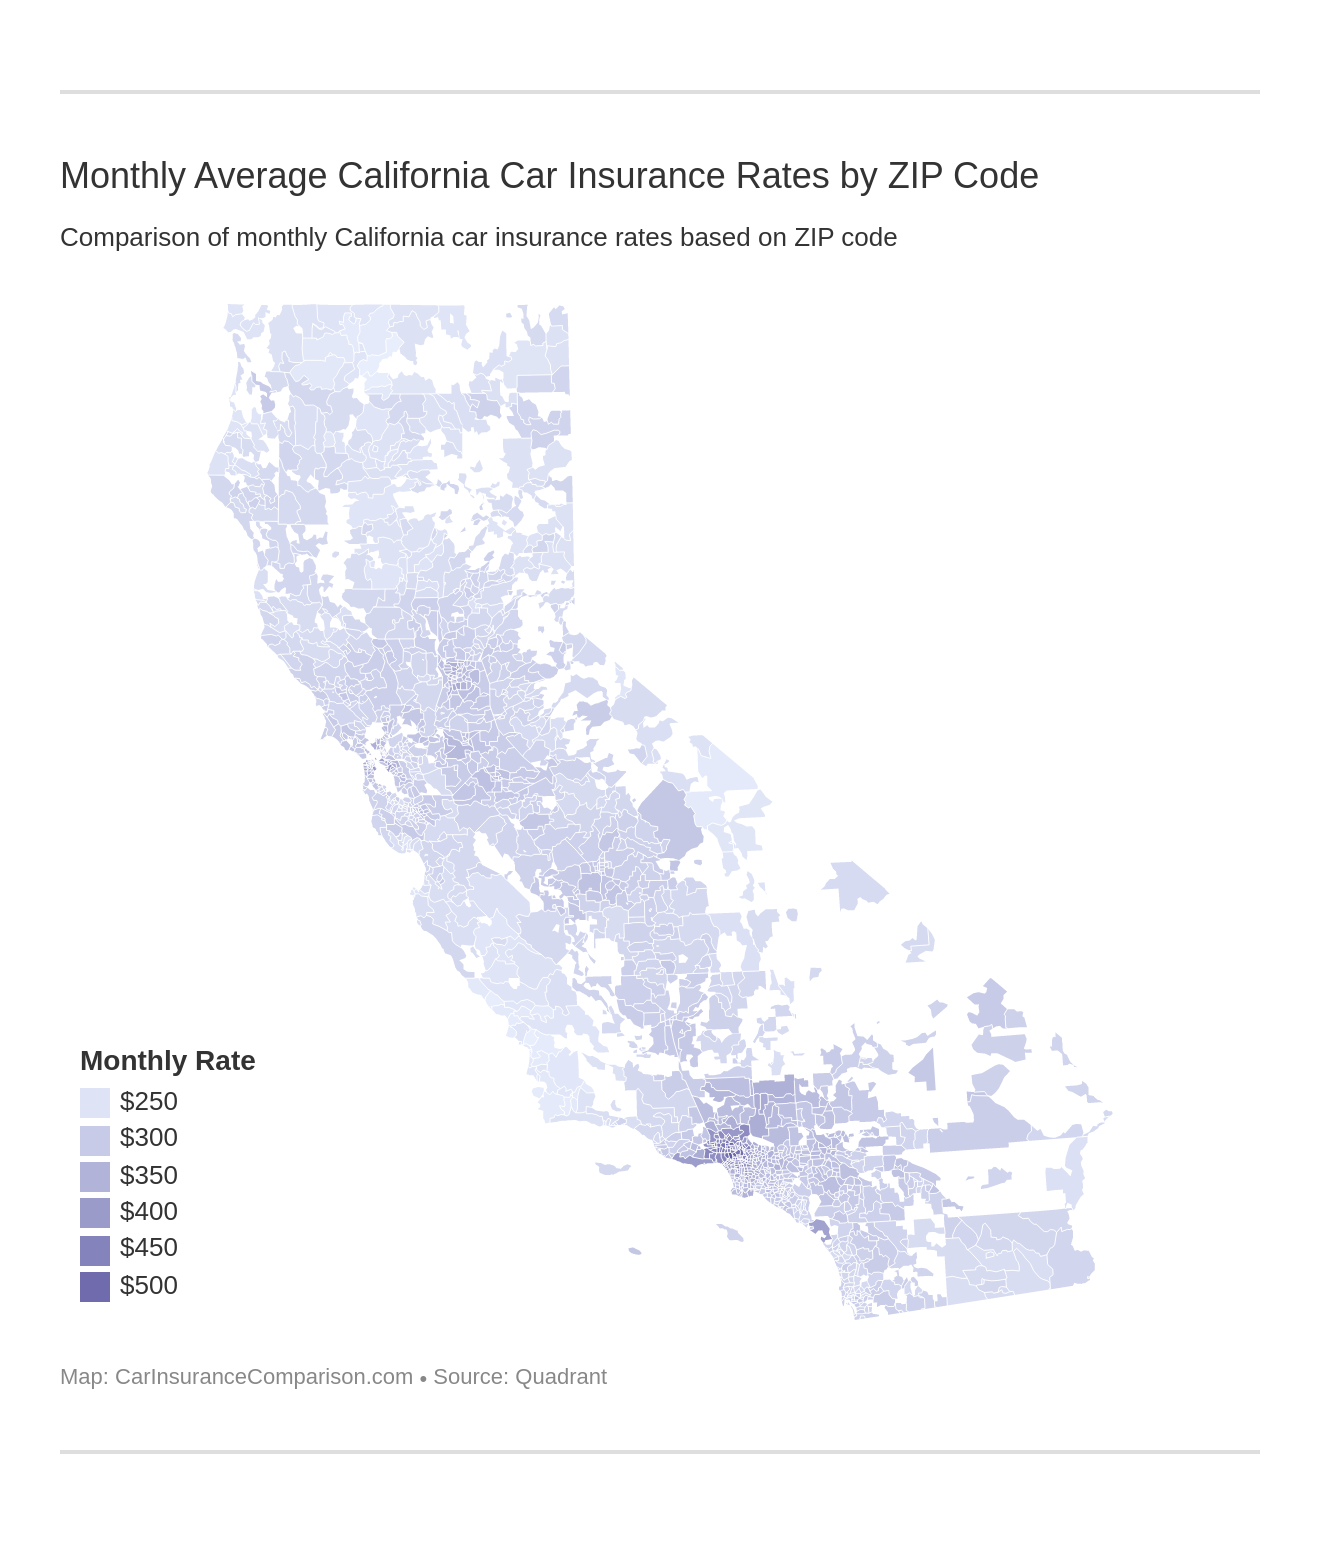 Monthly Average California Car Insurance Rates by ZIP Code